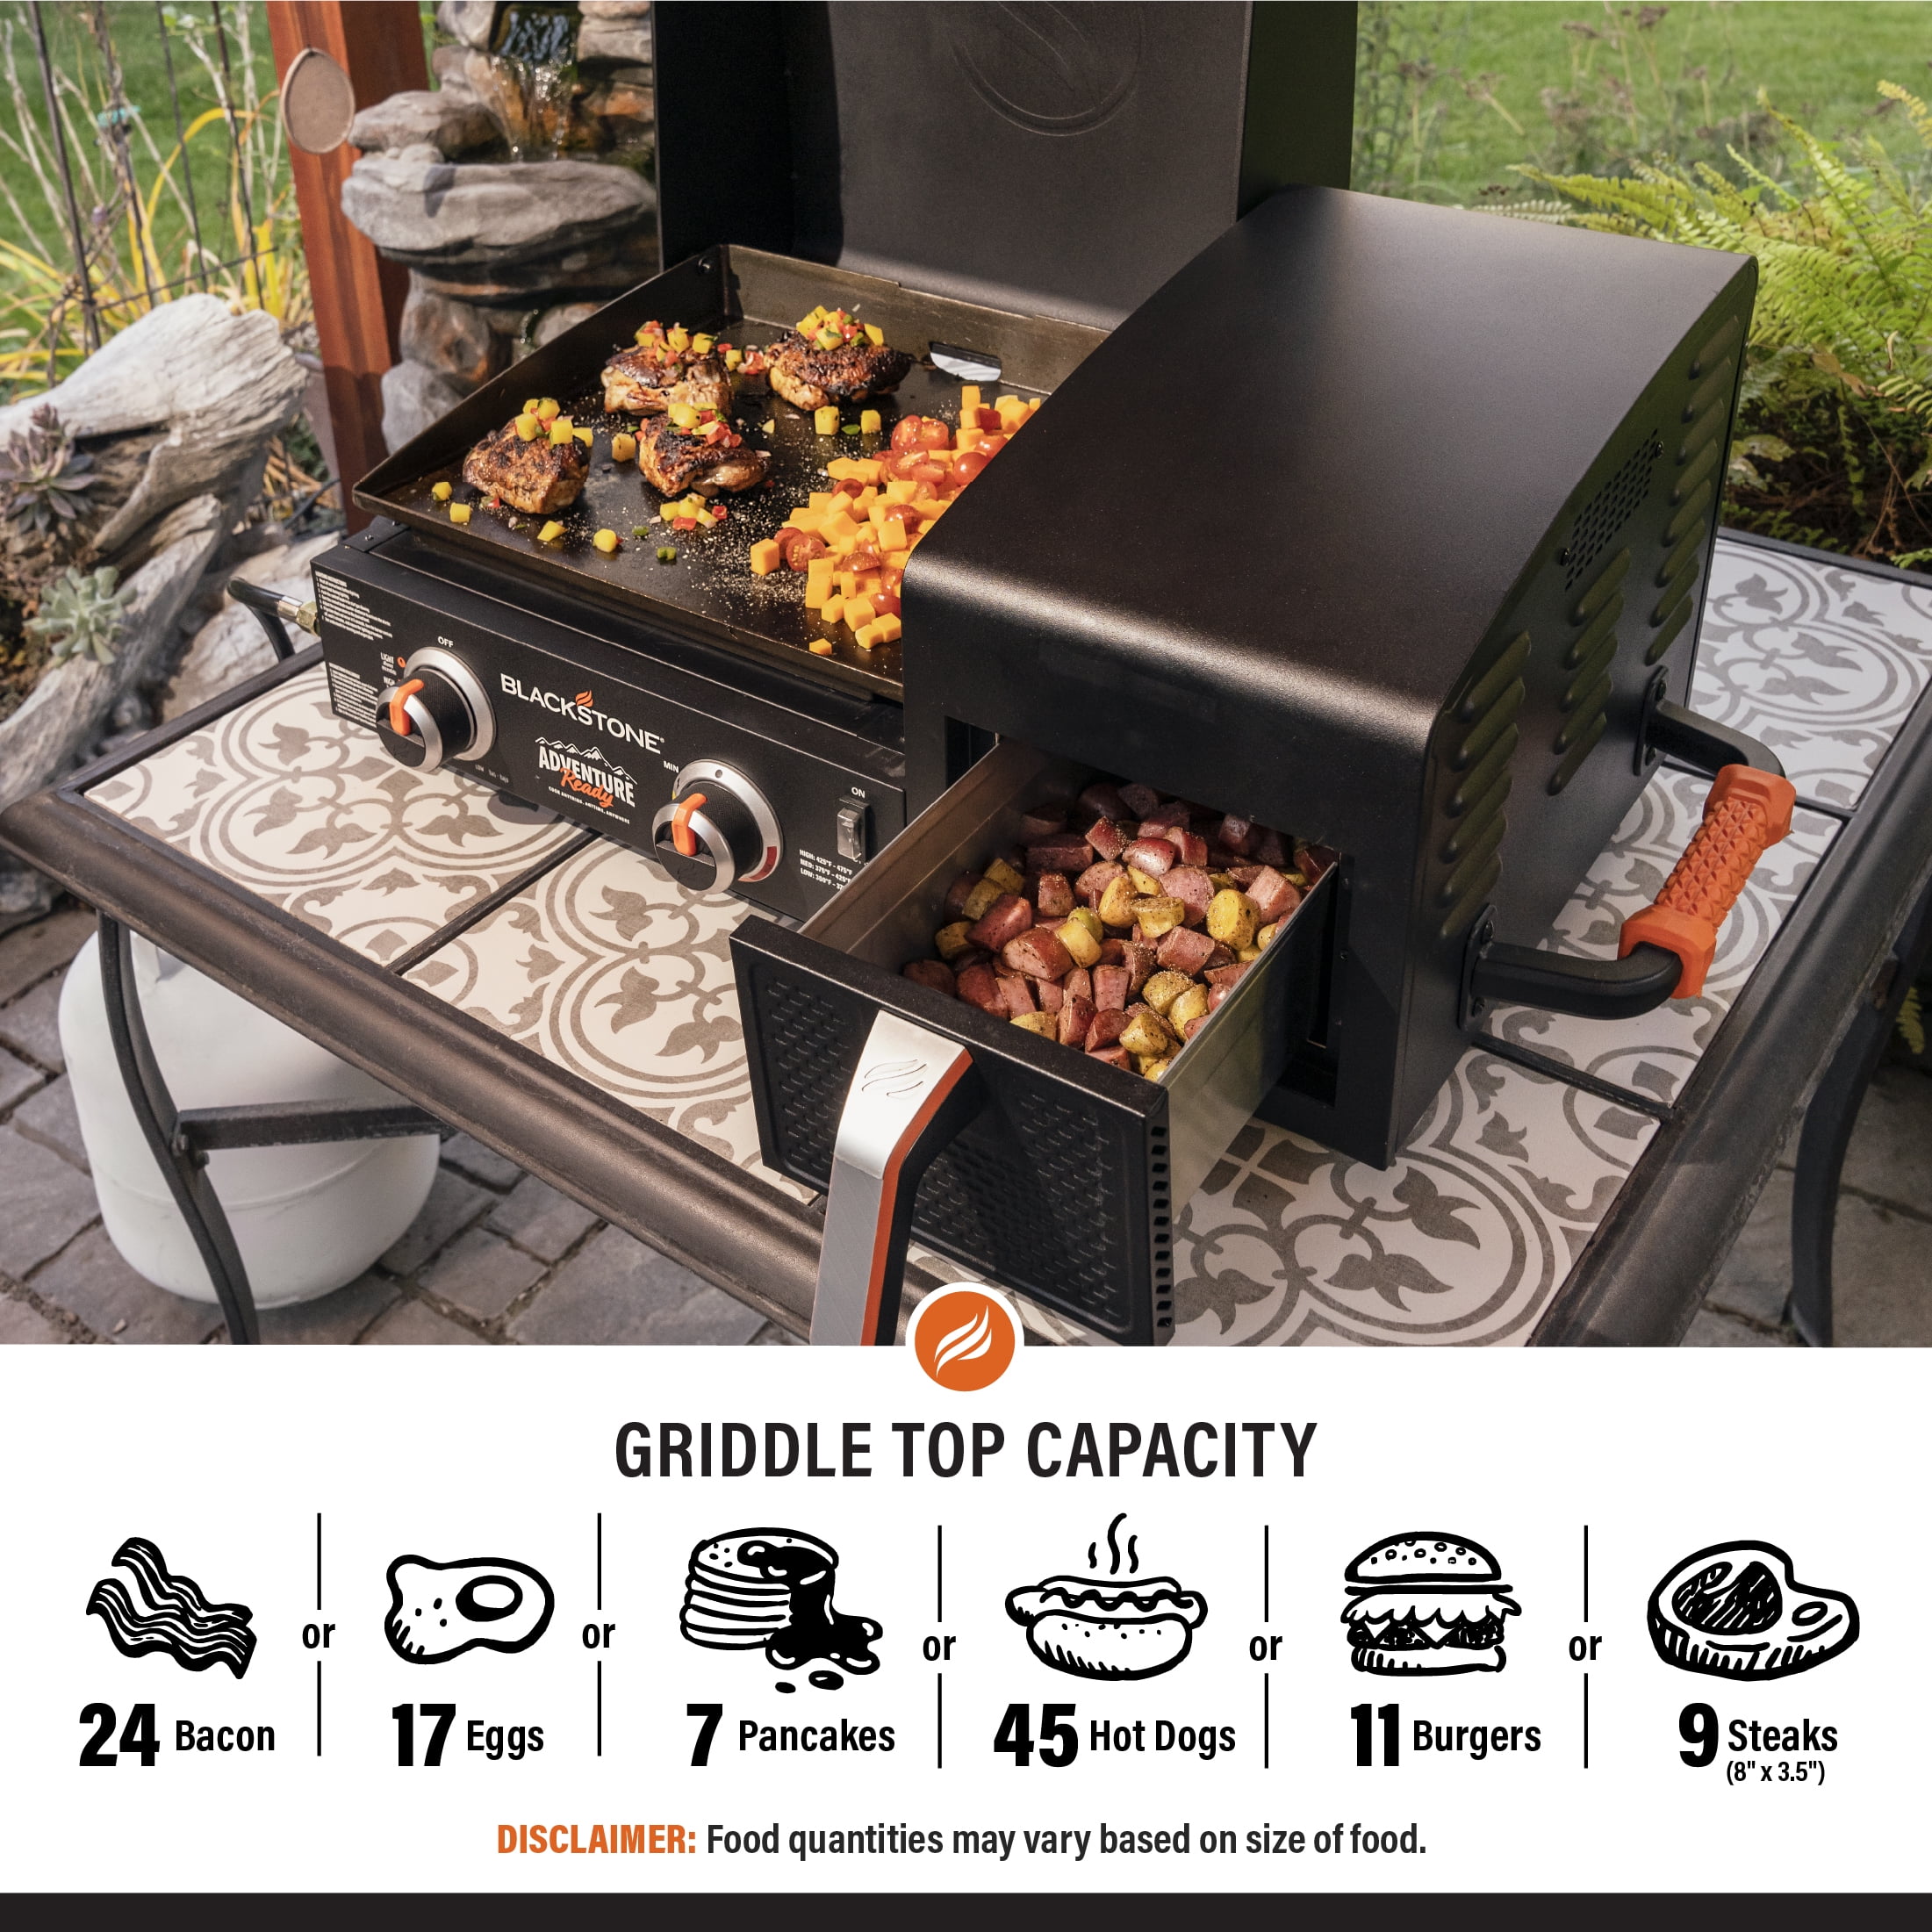 This outdoor griddle has a built-in air fryer—and it's $110 off right now